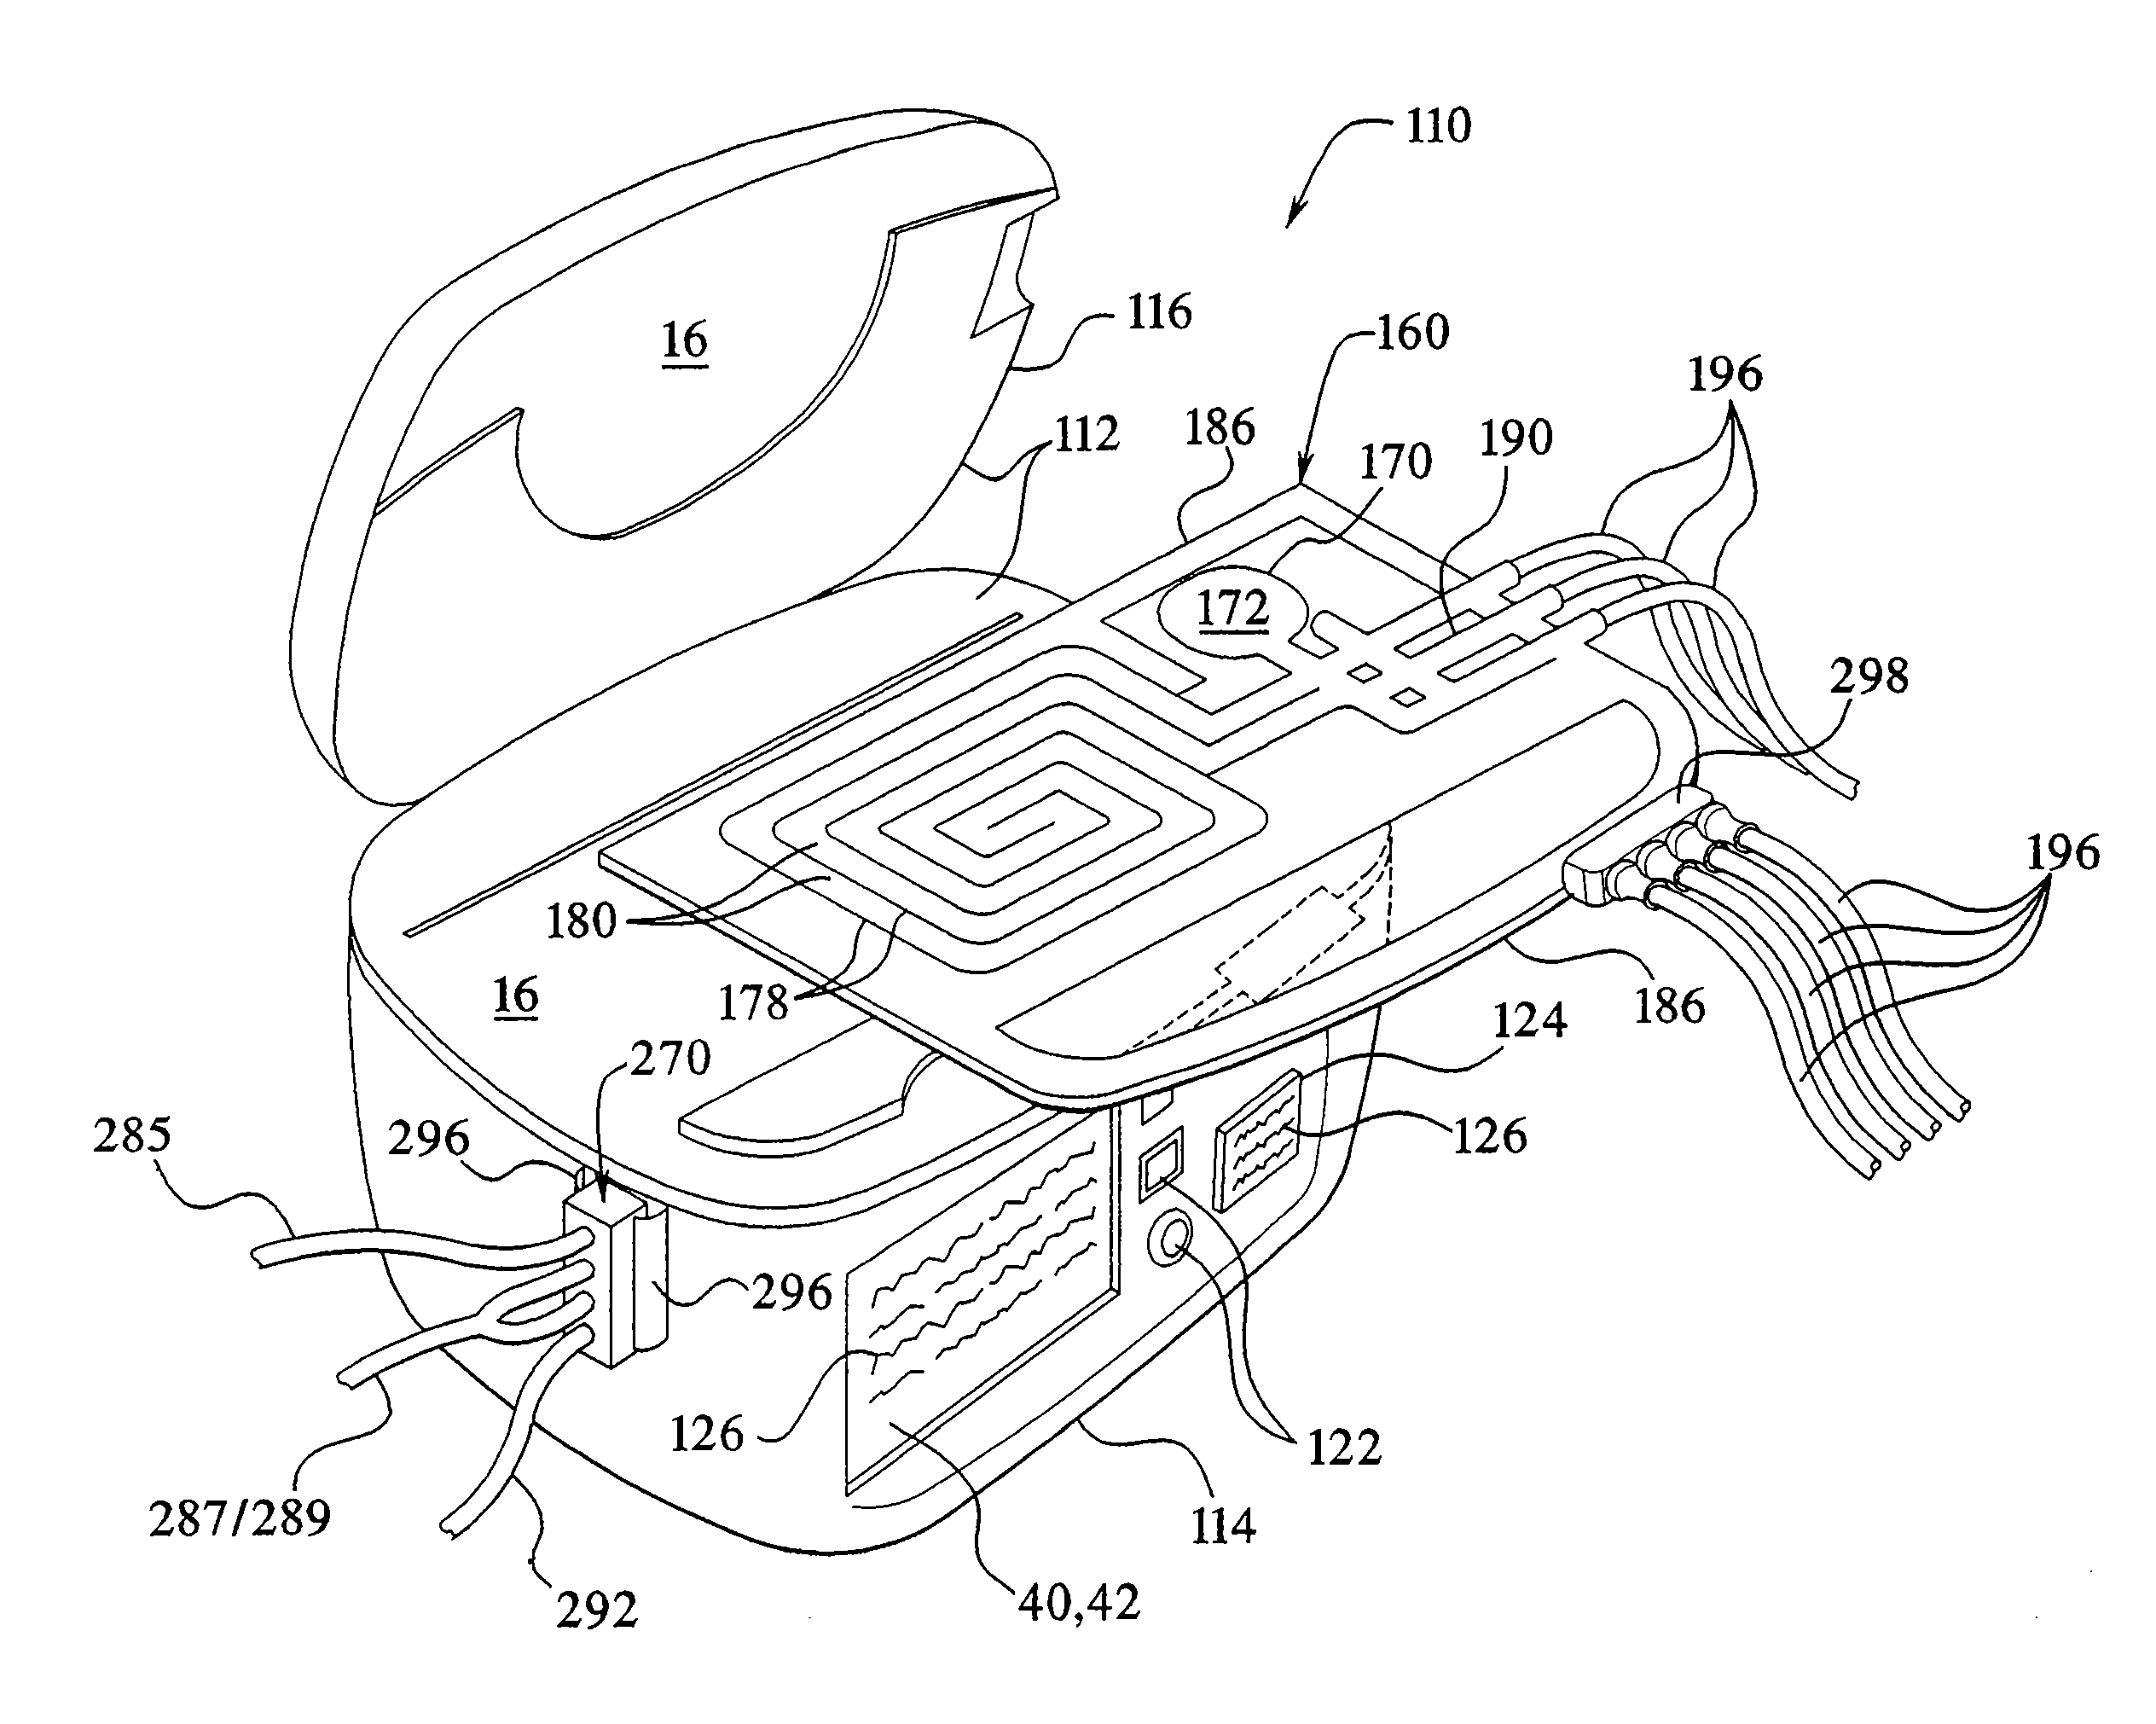 Method of making a peritoneal dialysis therapy machine